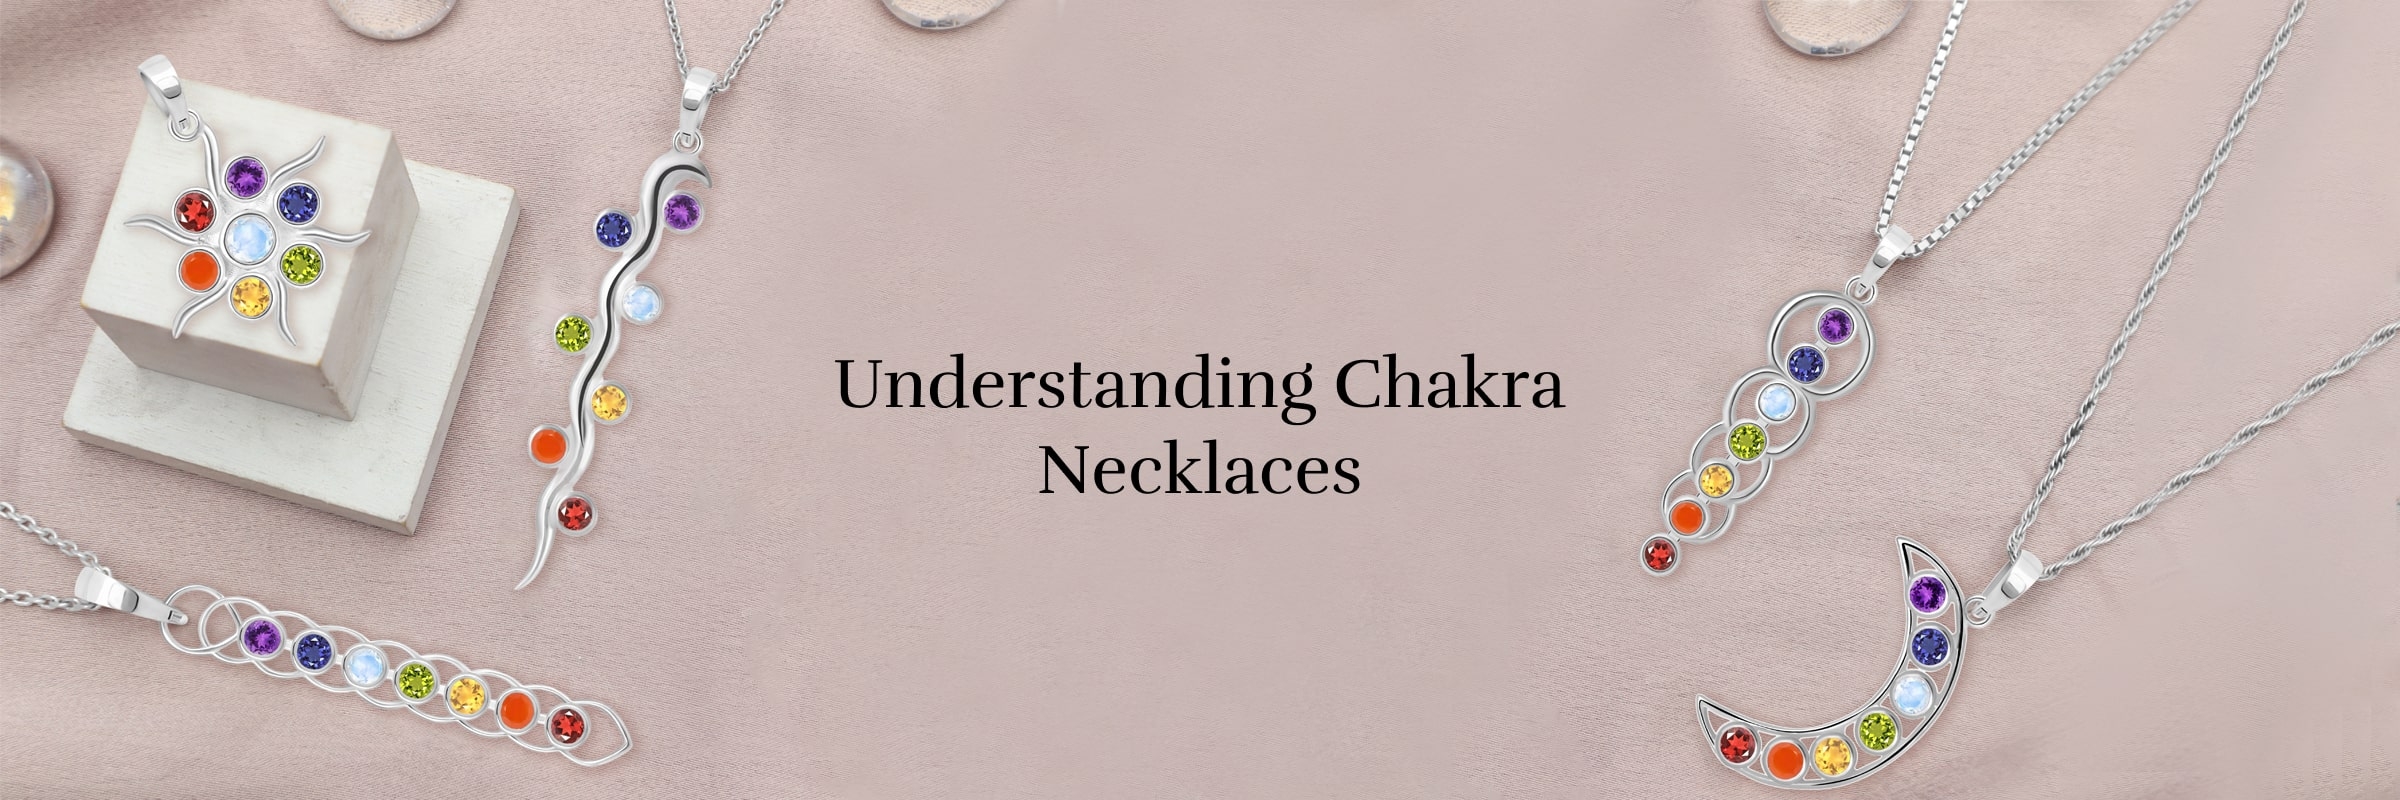 What is a Chakra Necklace?